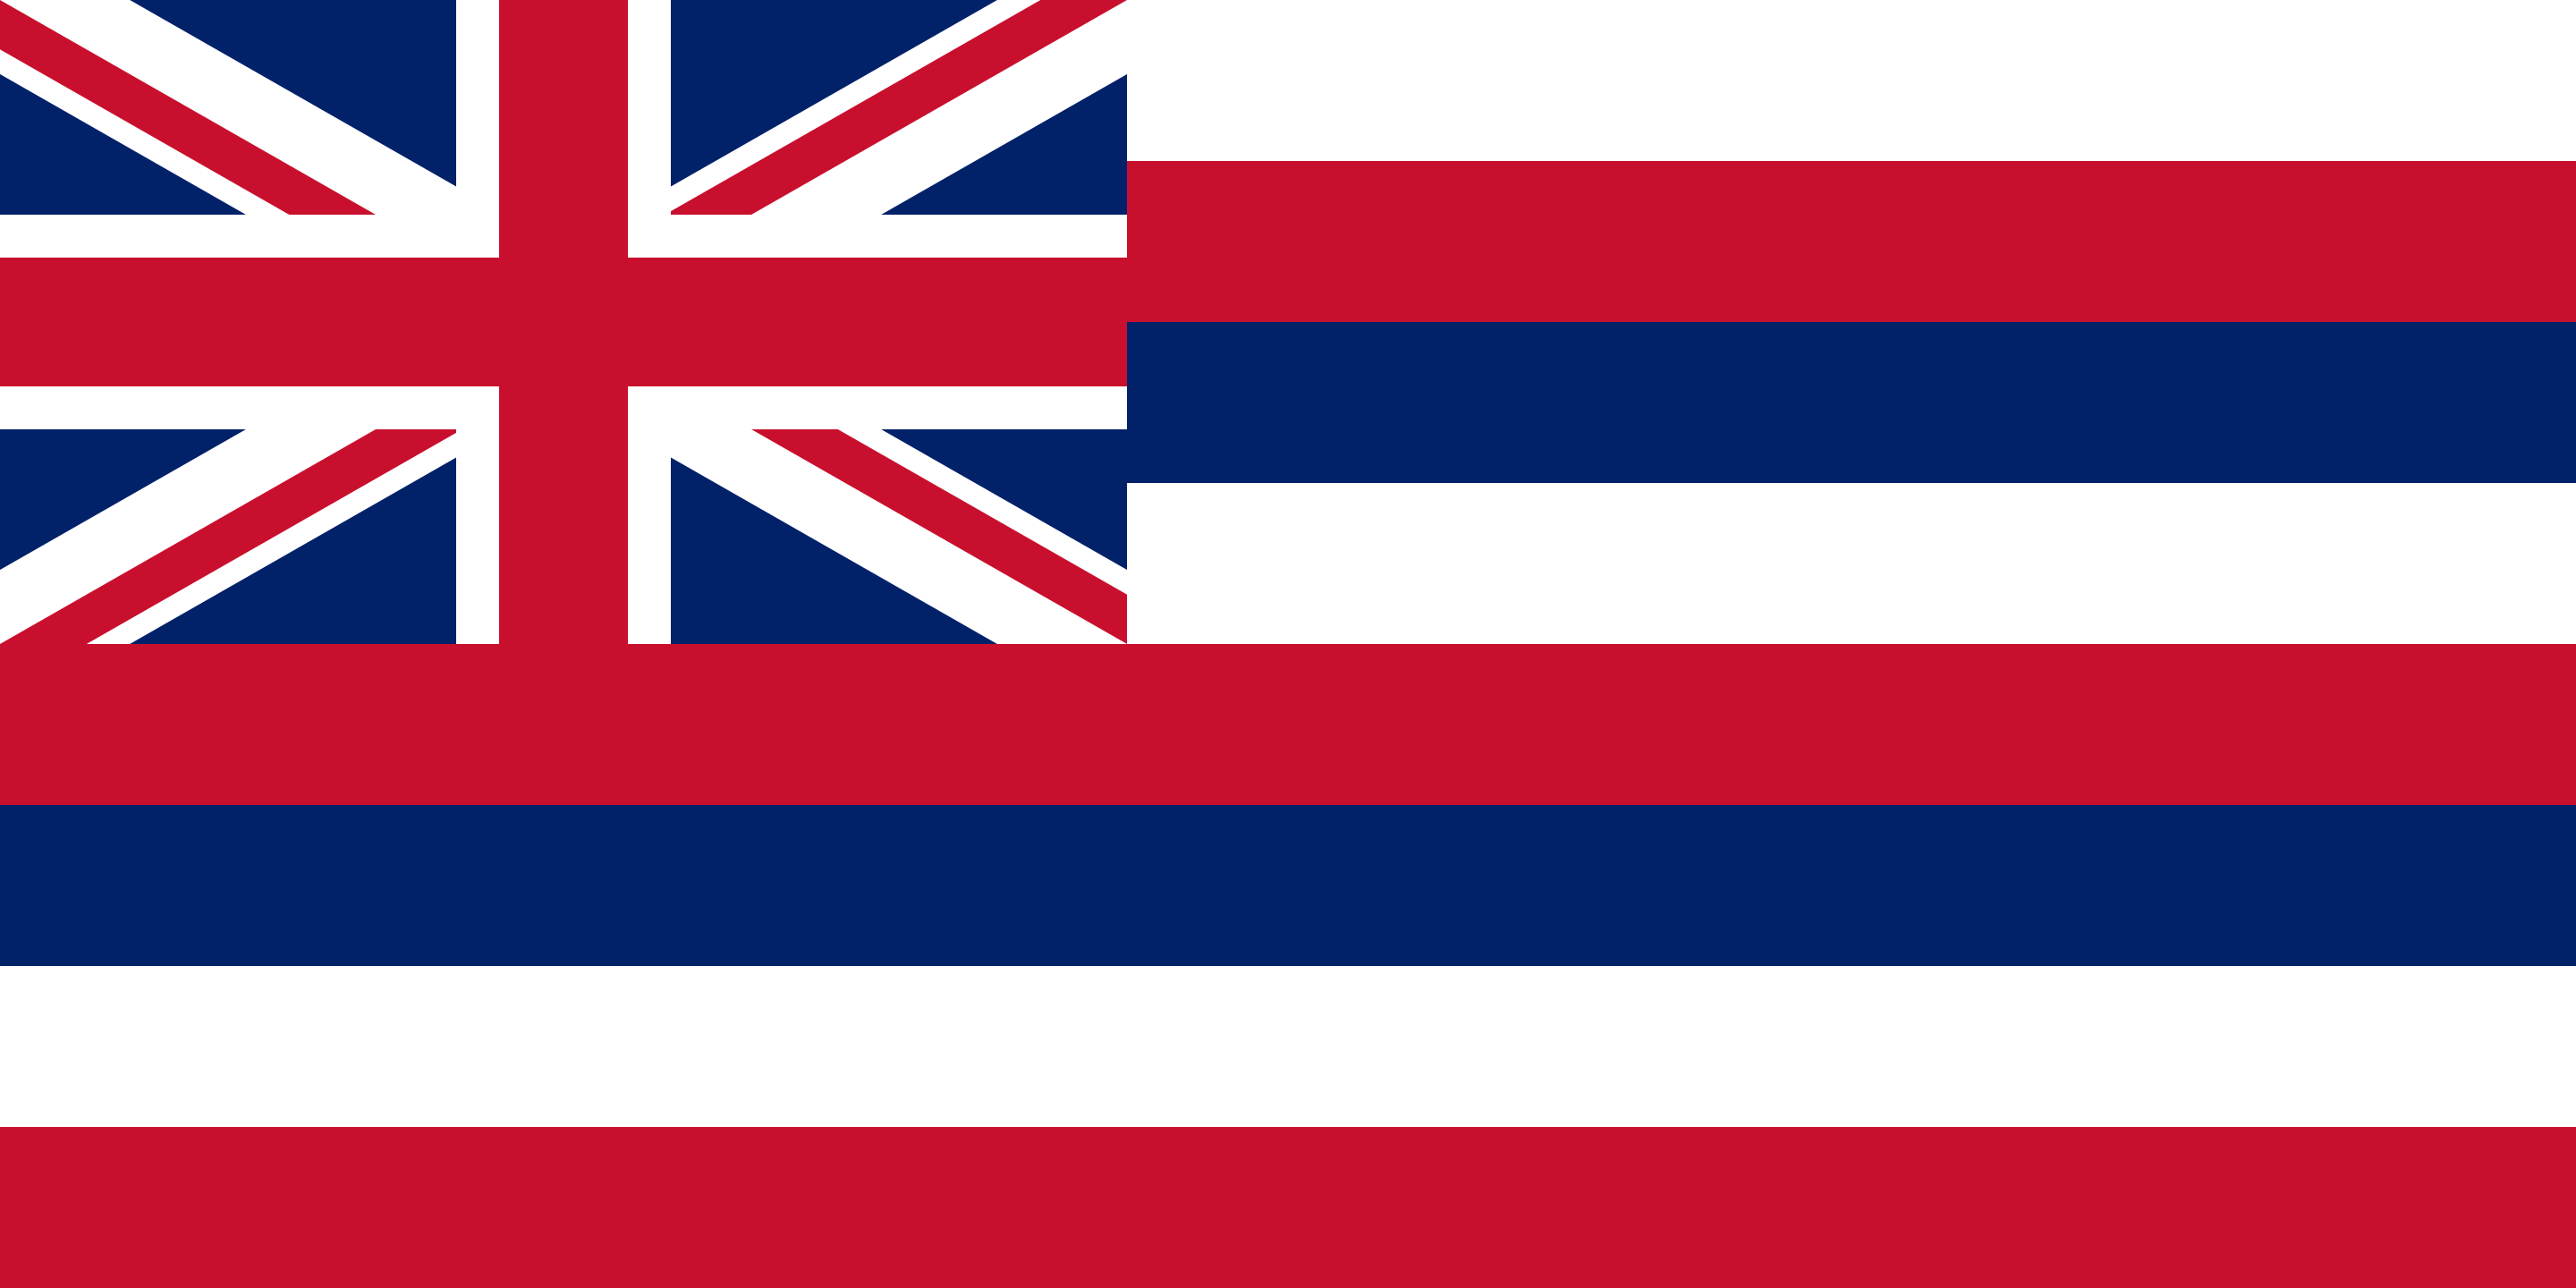 The Hawaii State Flag